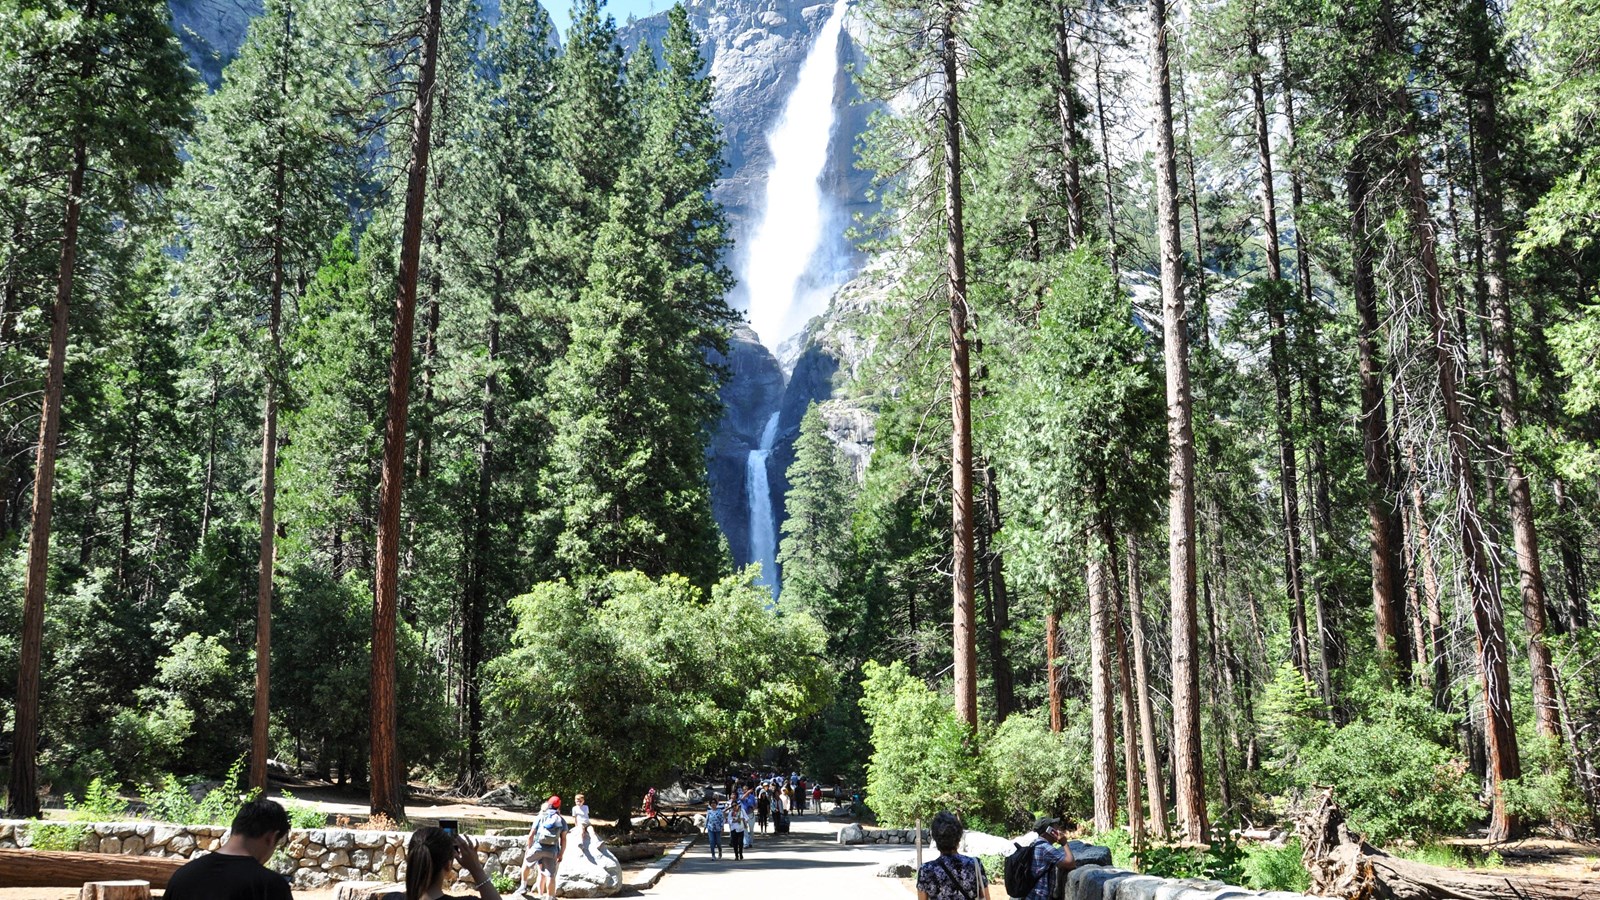 Visitors viewing Yosemite Falls from the trailhead with a full waterfall in the background.